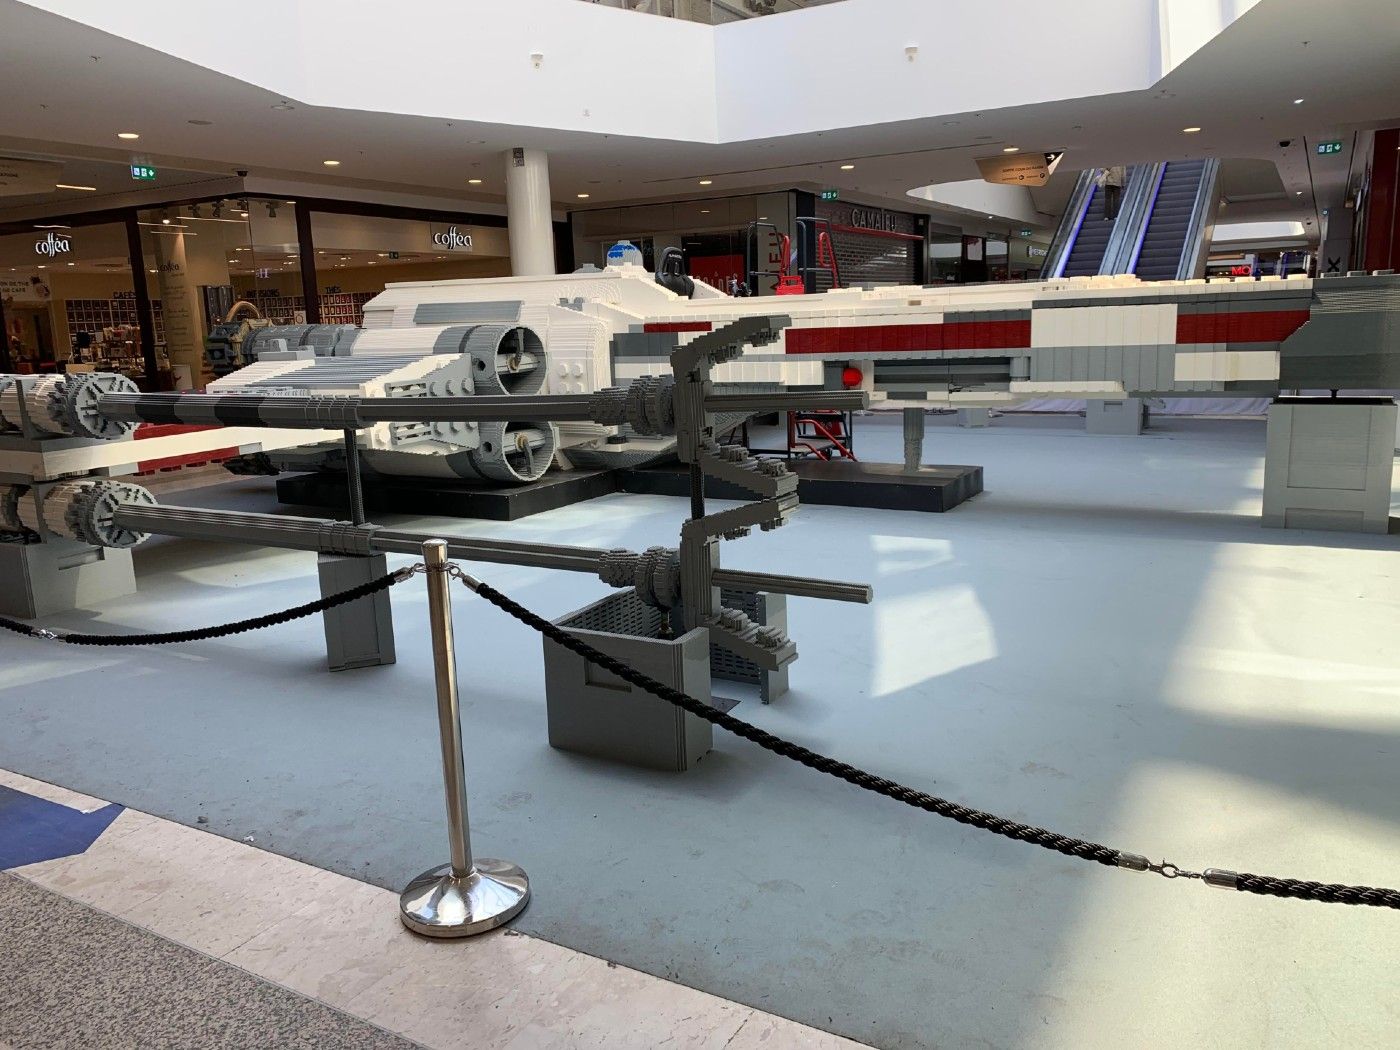 other angle of star wars x-wing replica made of lego